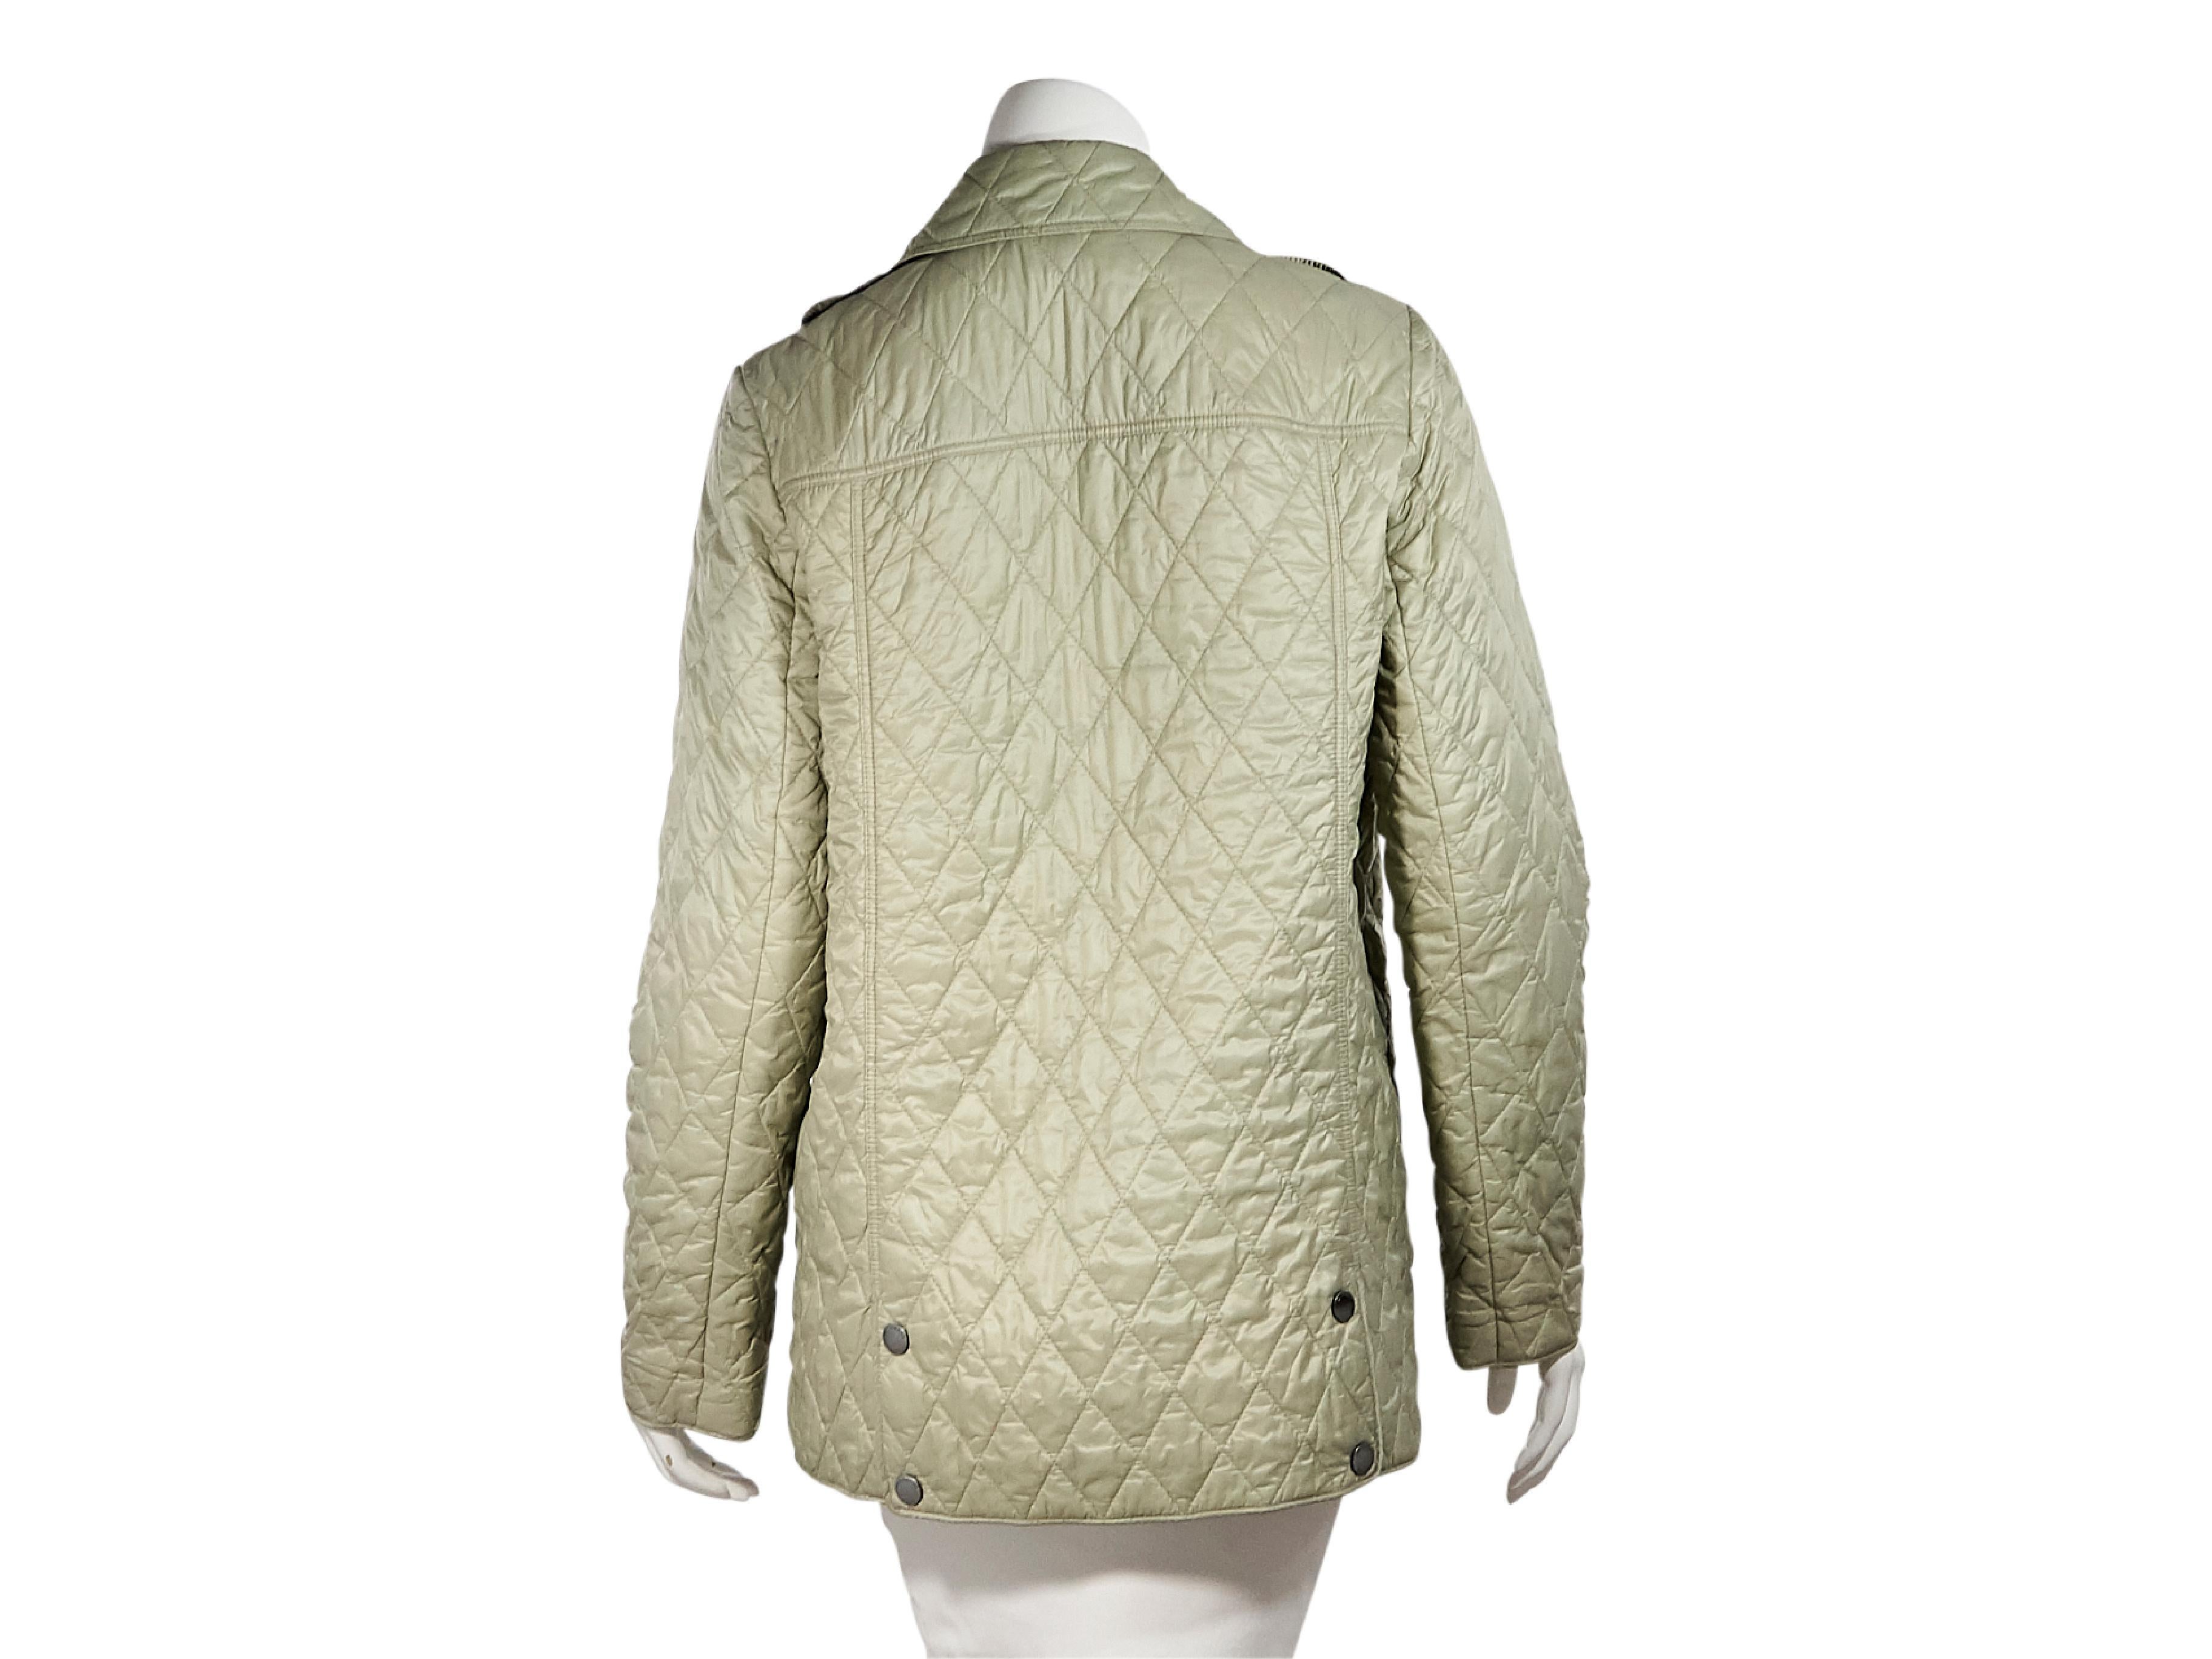 Product details:  Light green quilted jacket by Burberry.  Spread collar.  Long sleeves.  Snap-front closure.  Waist patch pockets.  Snap back hem vents.  Silvertone hardware.  38